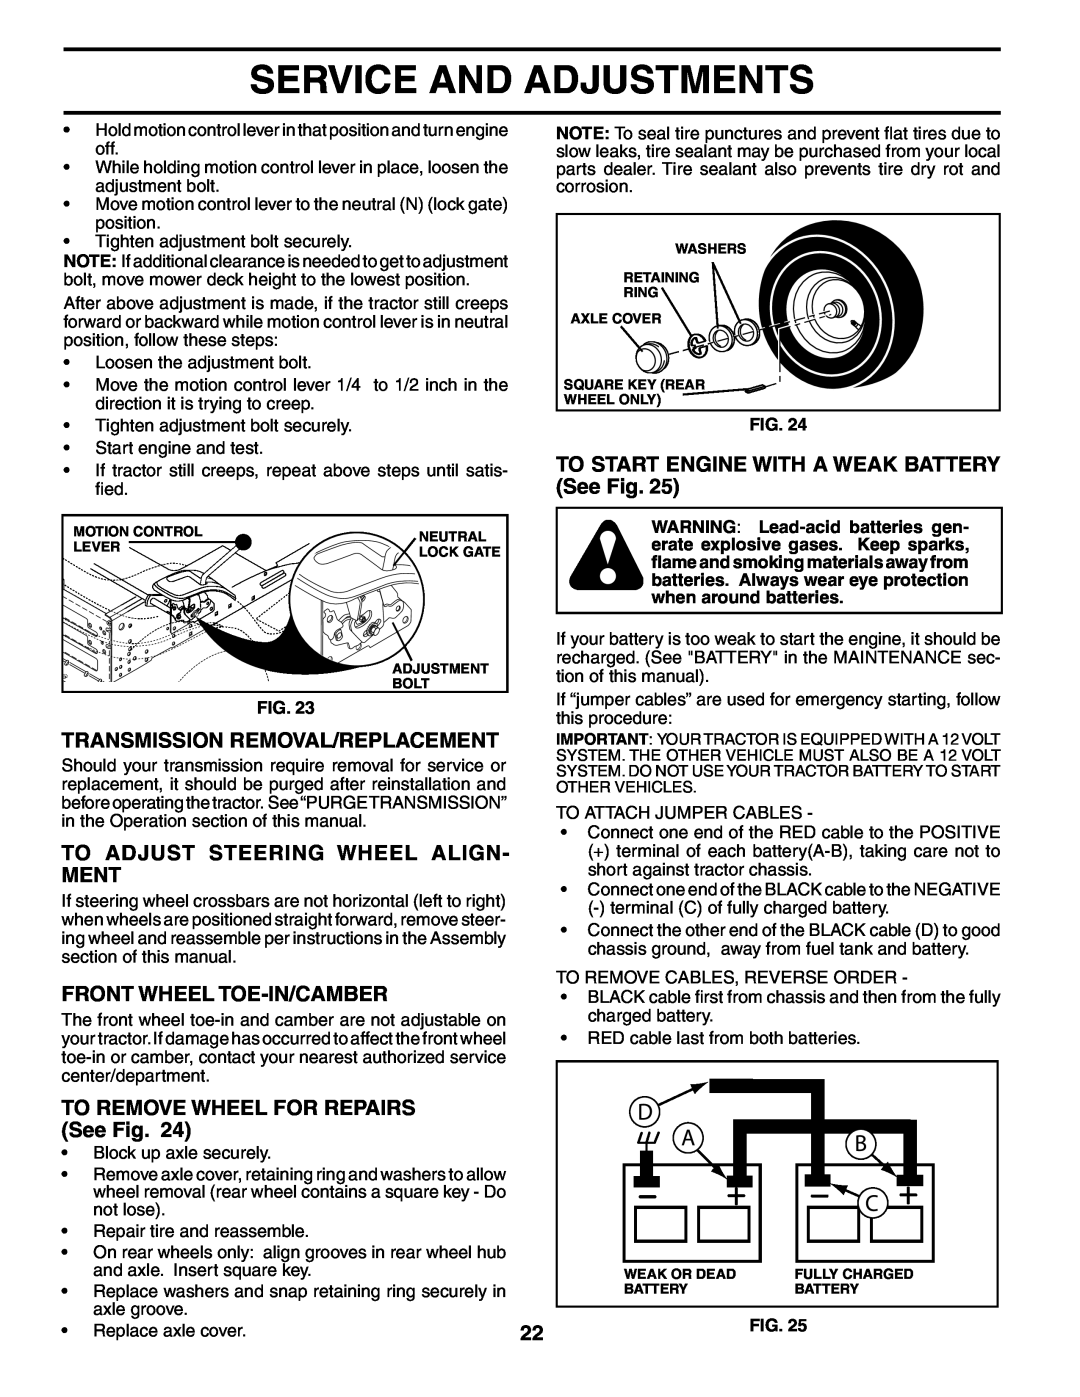 Poulan 195018 manual Transmission Removal/Replacement, To Adjust Steering Wheel Align- Ment, Front Wheel Toe-In/Camber 